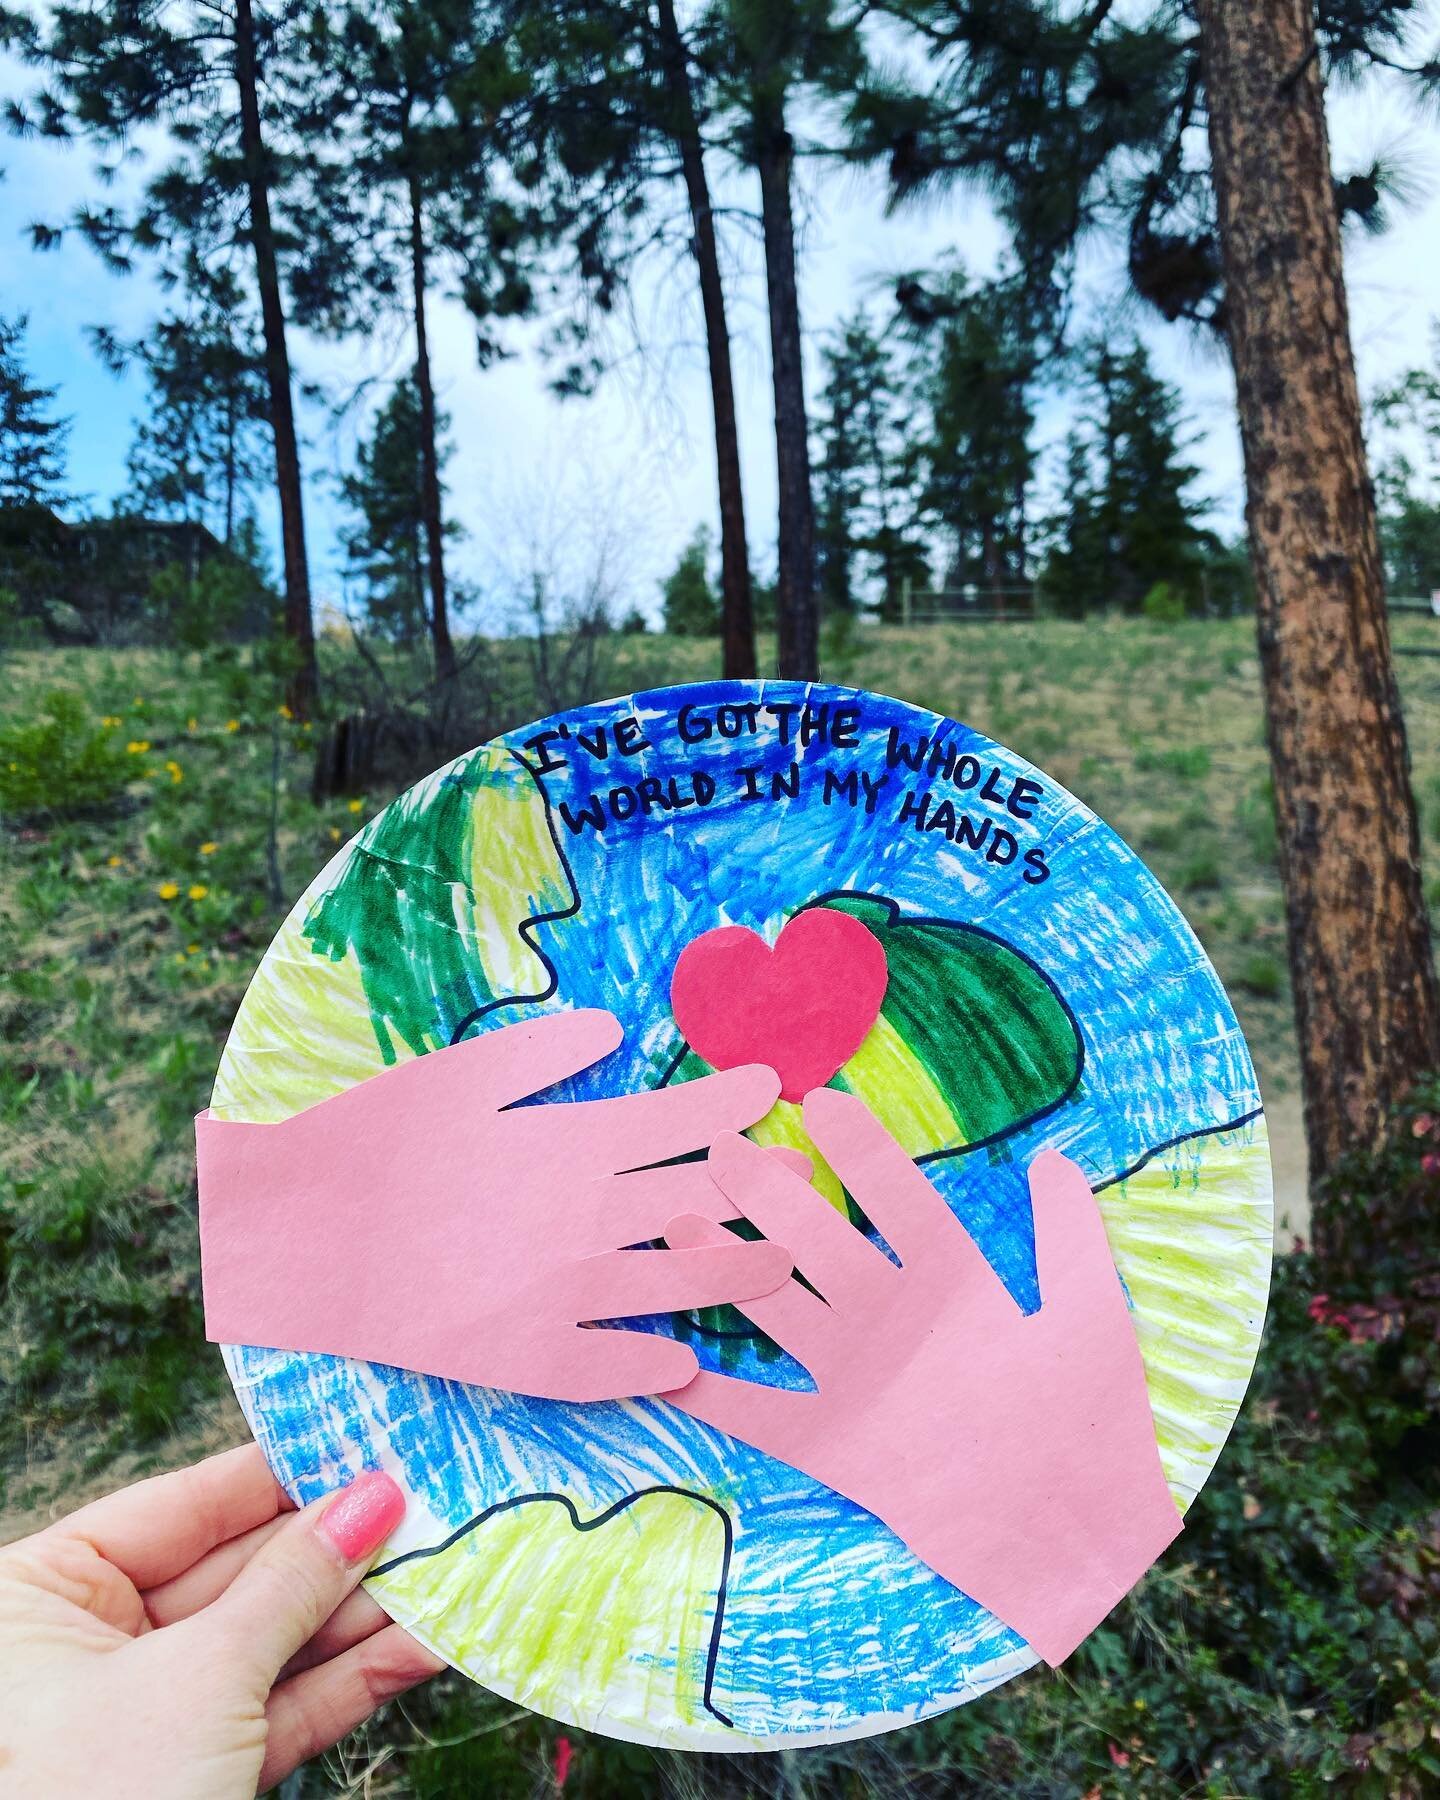 Happy Earth Day! Couldn&rsquo;t have captured or said it better than Everlee&rsquo;s dayhome creation💚💙🌎.

Everlee and I are out hiking and Rose Valley to soak up some nature and pick up any garbage we see. And today is the day. I start composting